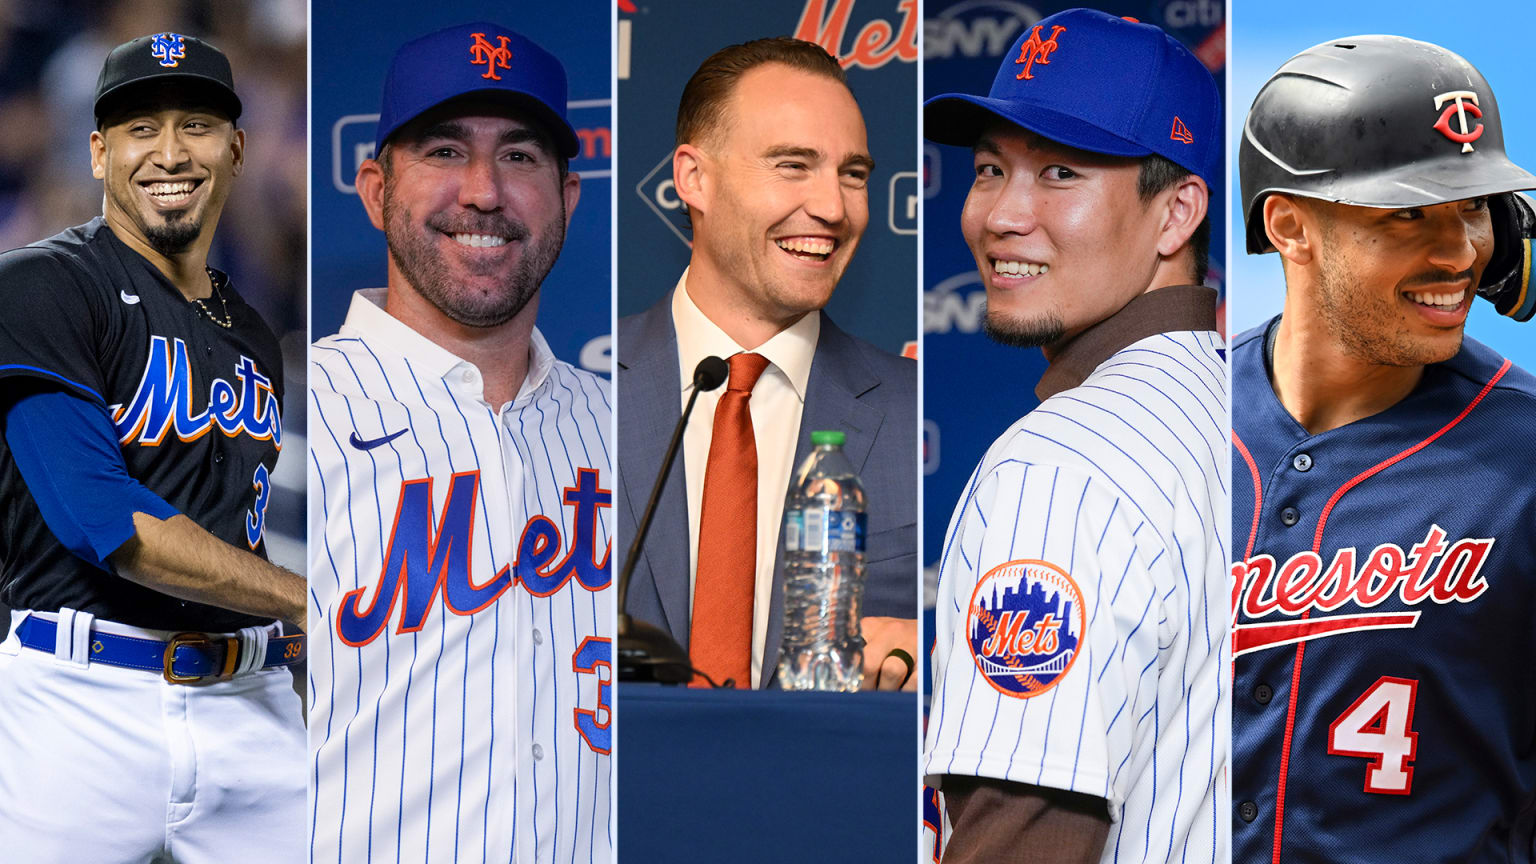 Images of 5 Mets players